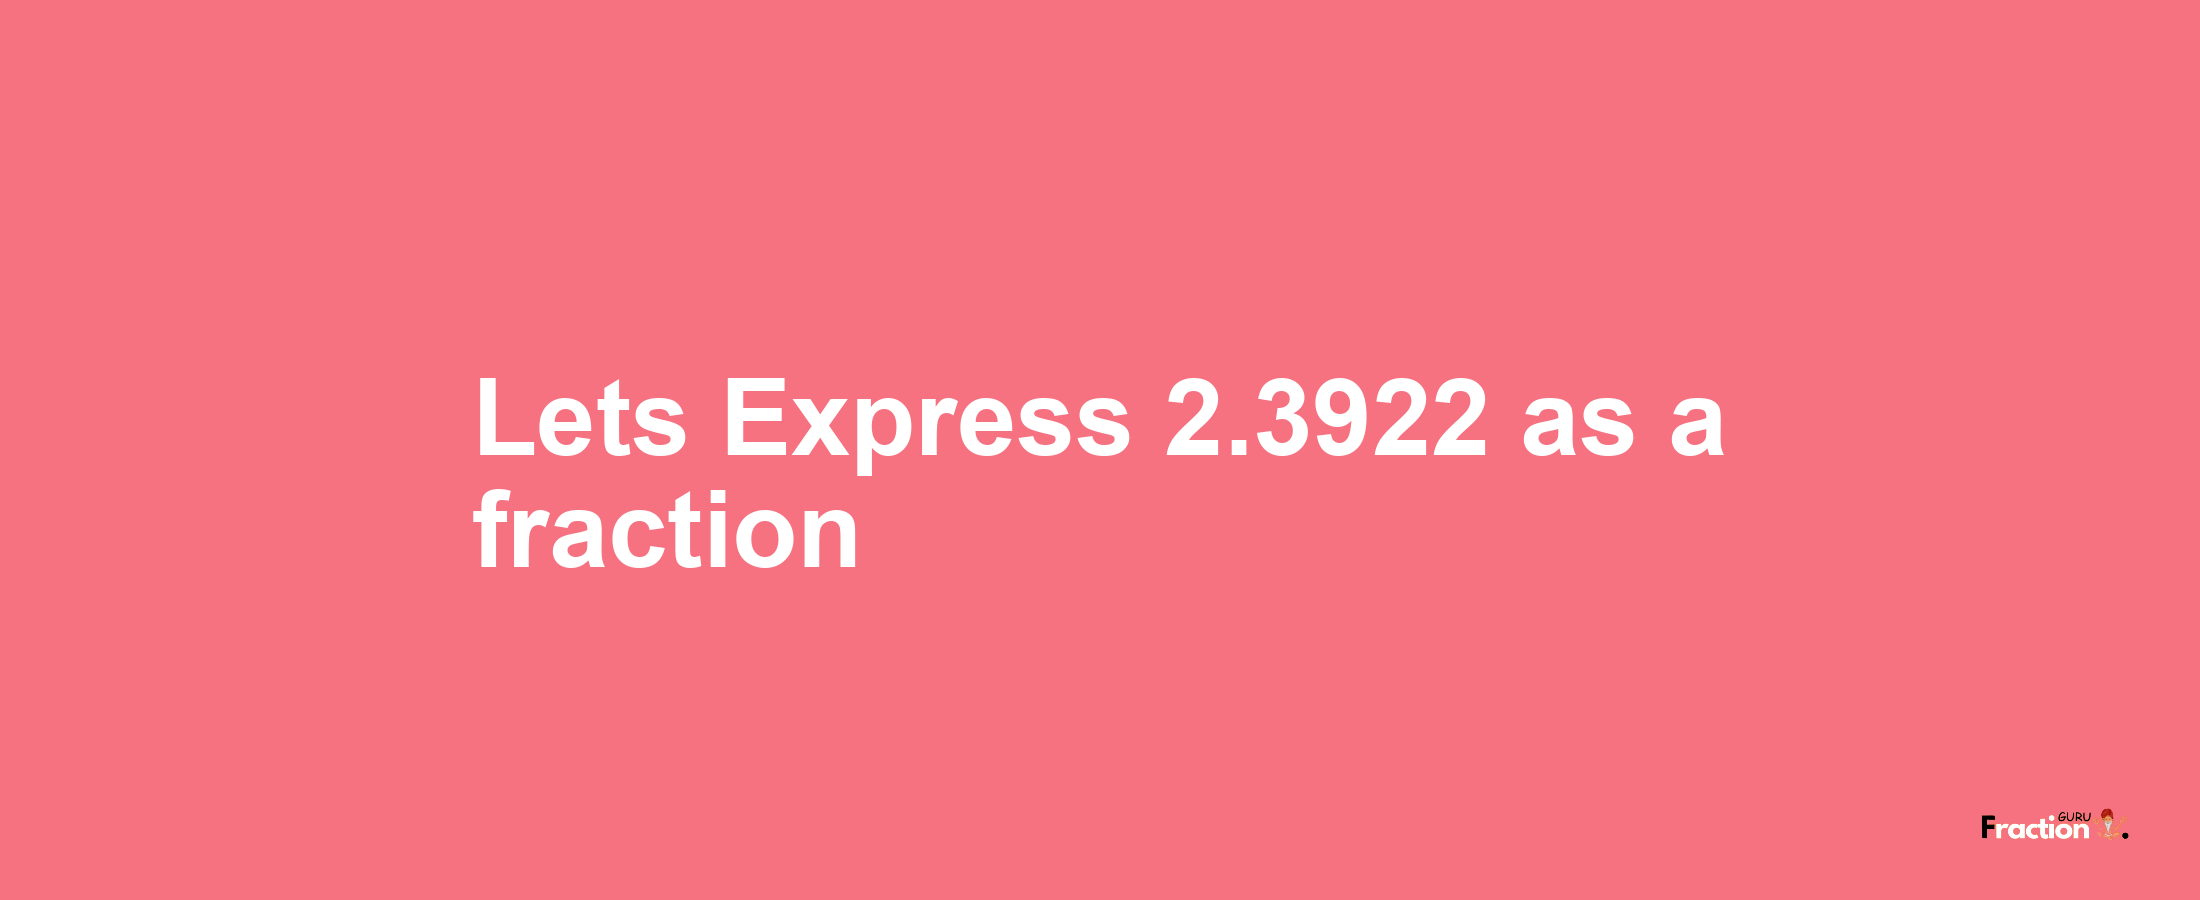 Lets Express 2.3922 as afraction